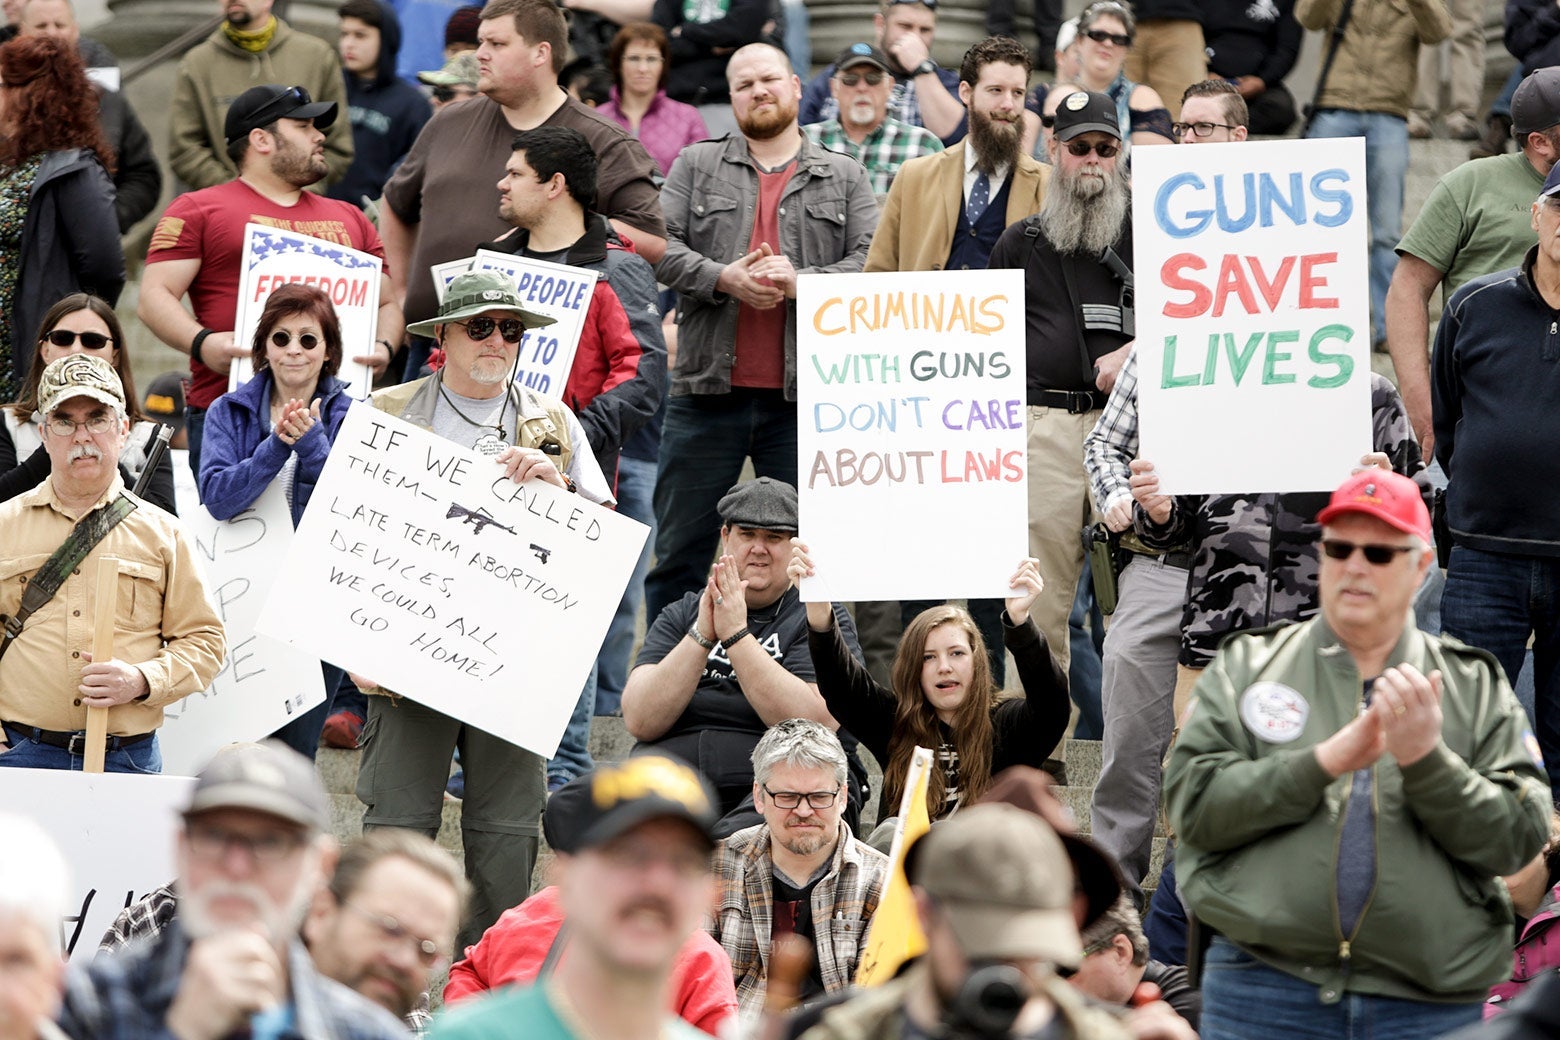 A crowd of gun rights activists holding signs such as "Guns Save Lives" and "Criminals With Guns Don't Care About Laws."